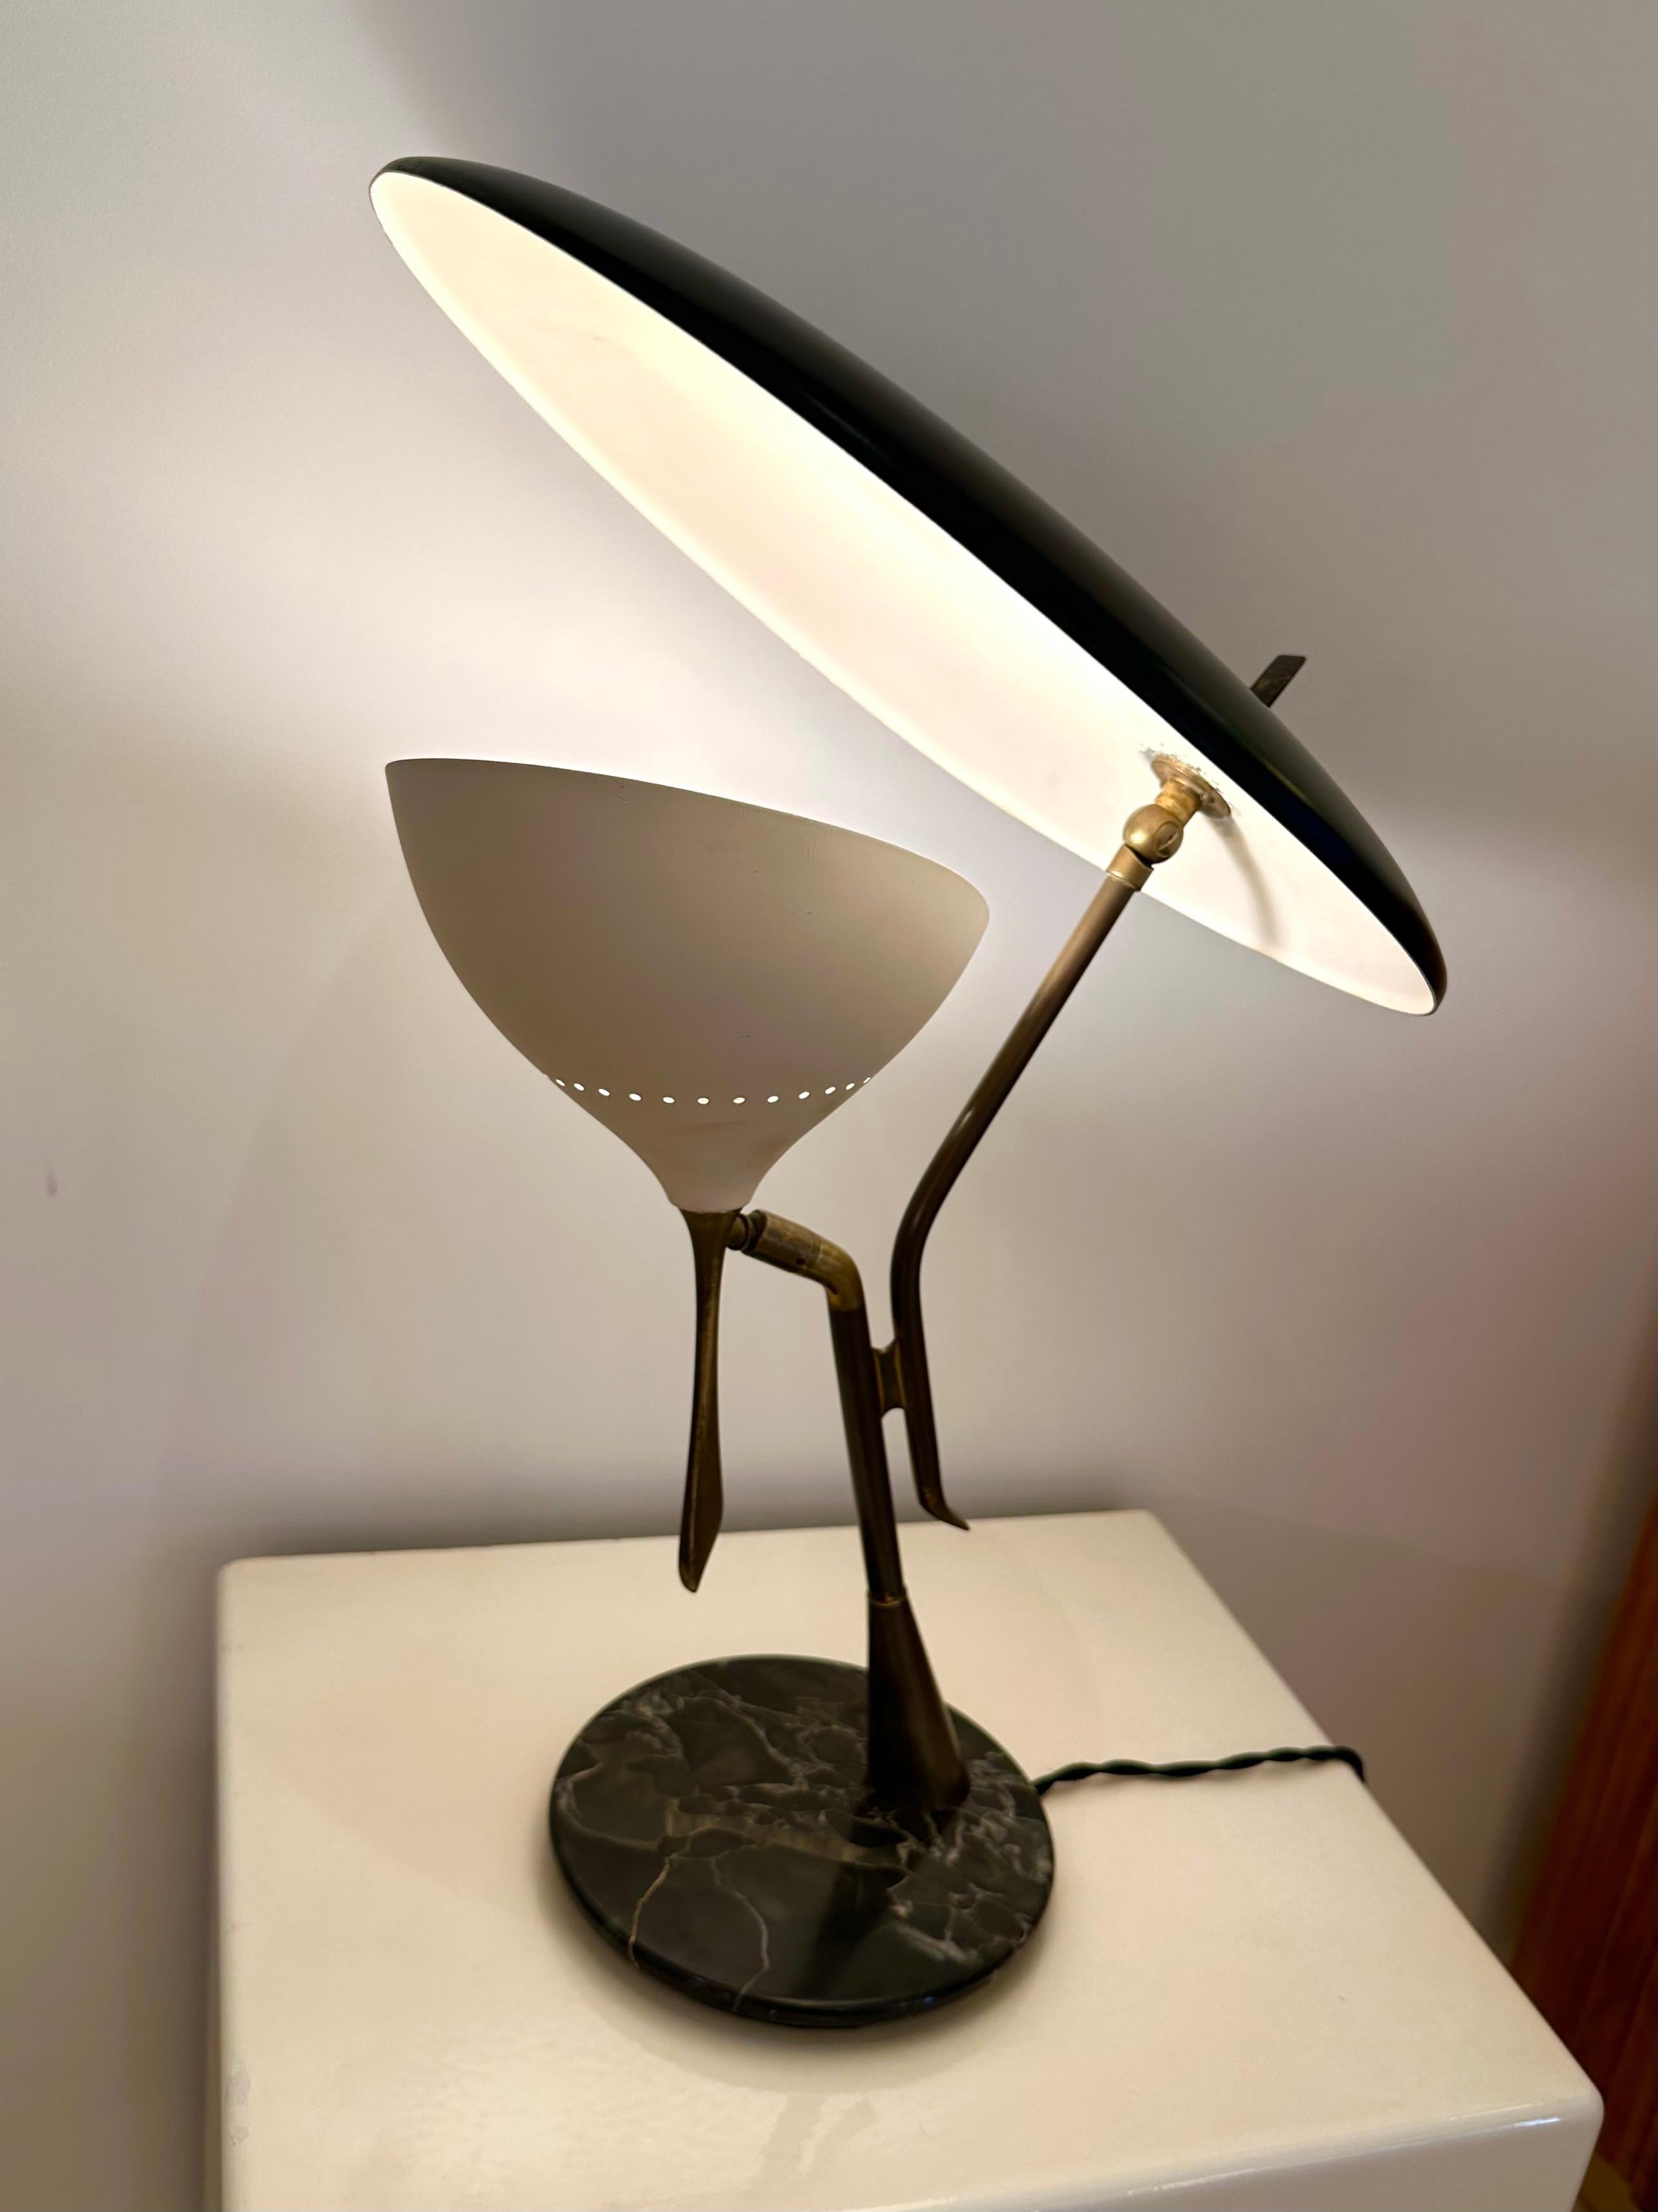 Italian Midcentury Desk Lamp Painted Metal, Brass, Marble by Lumen, Italy, 1950s For Sale